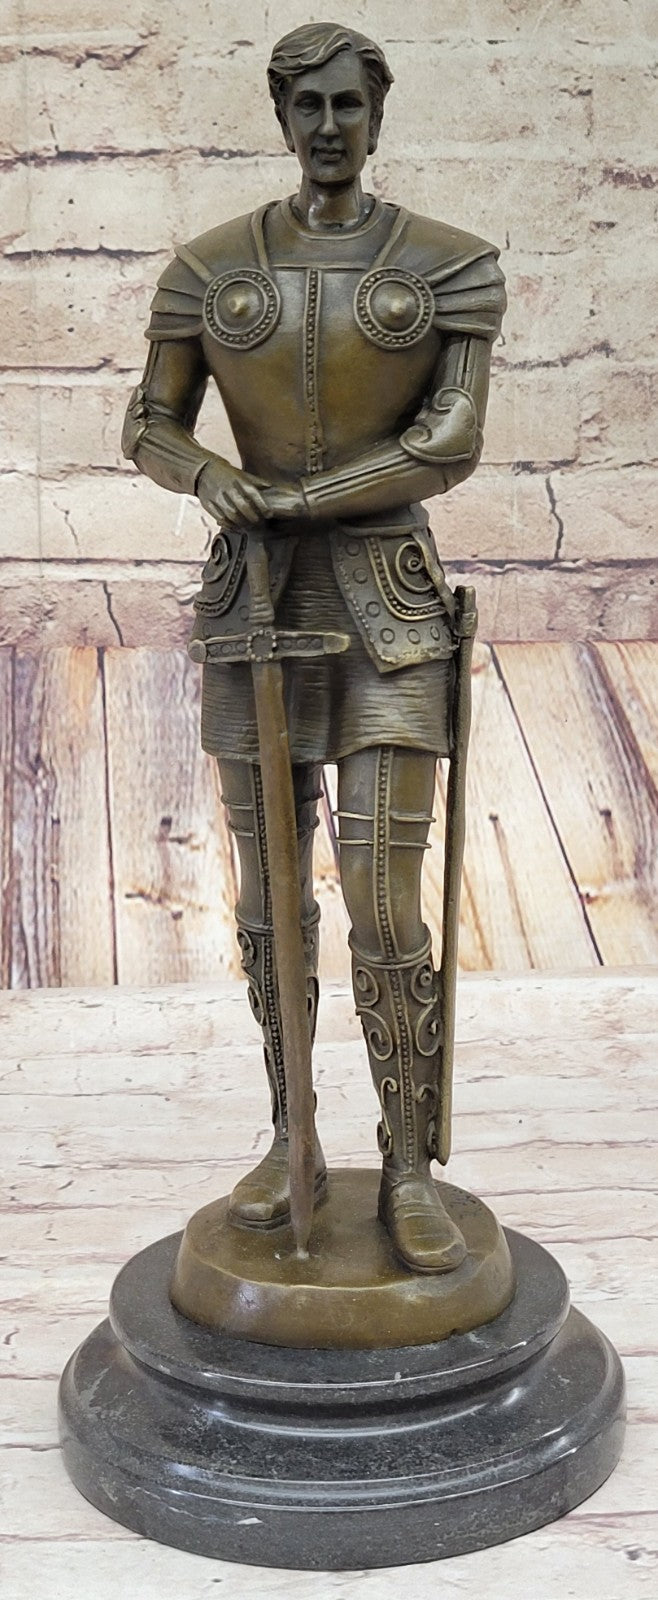 Portuguese Bronze Sculpture Knight in Armor by R. Bouillot Handcrafted Figurine